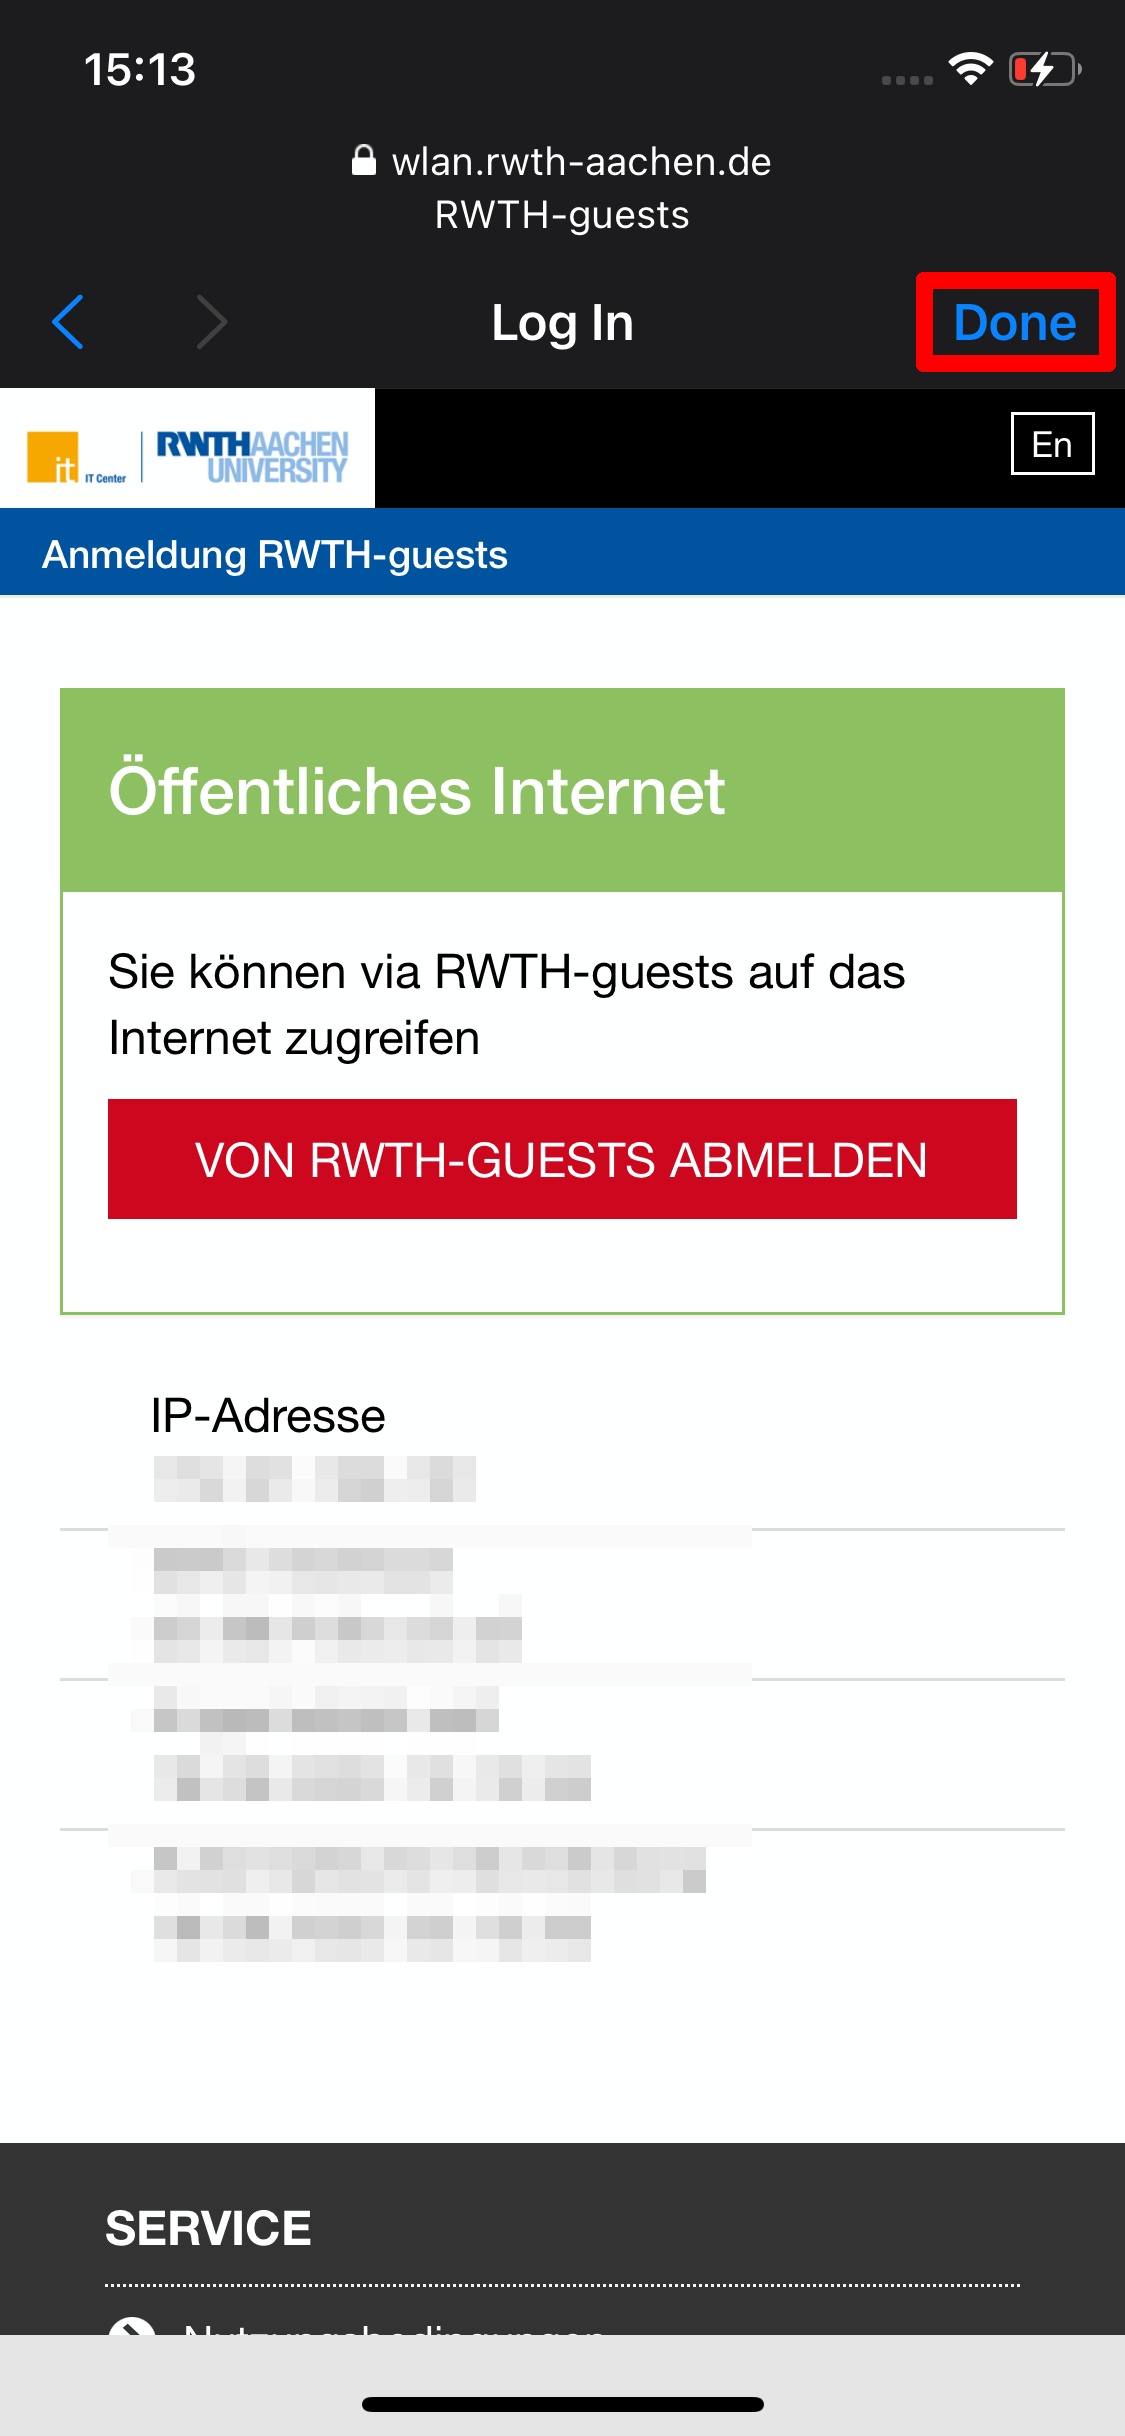 Successful connection to RWTH-guests